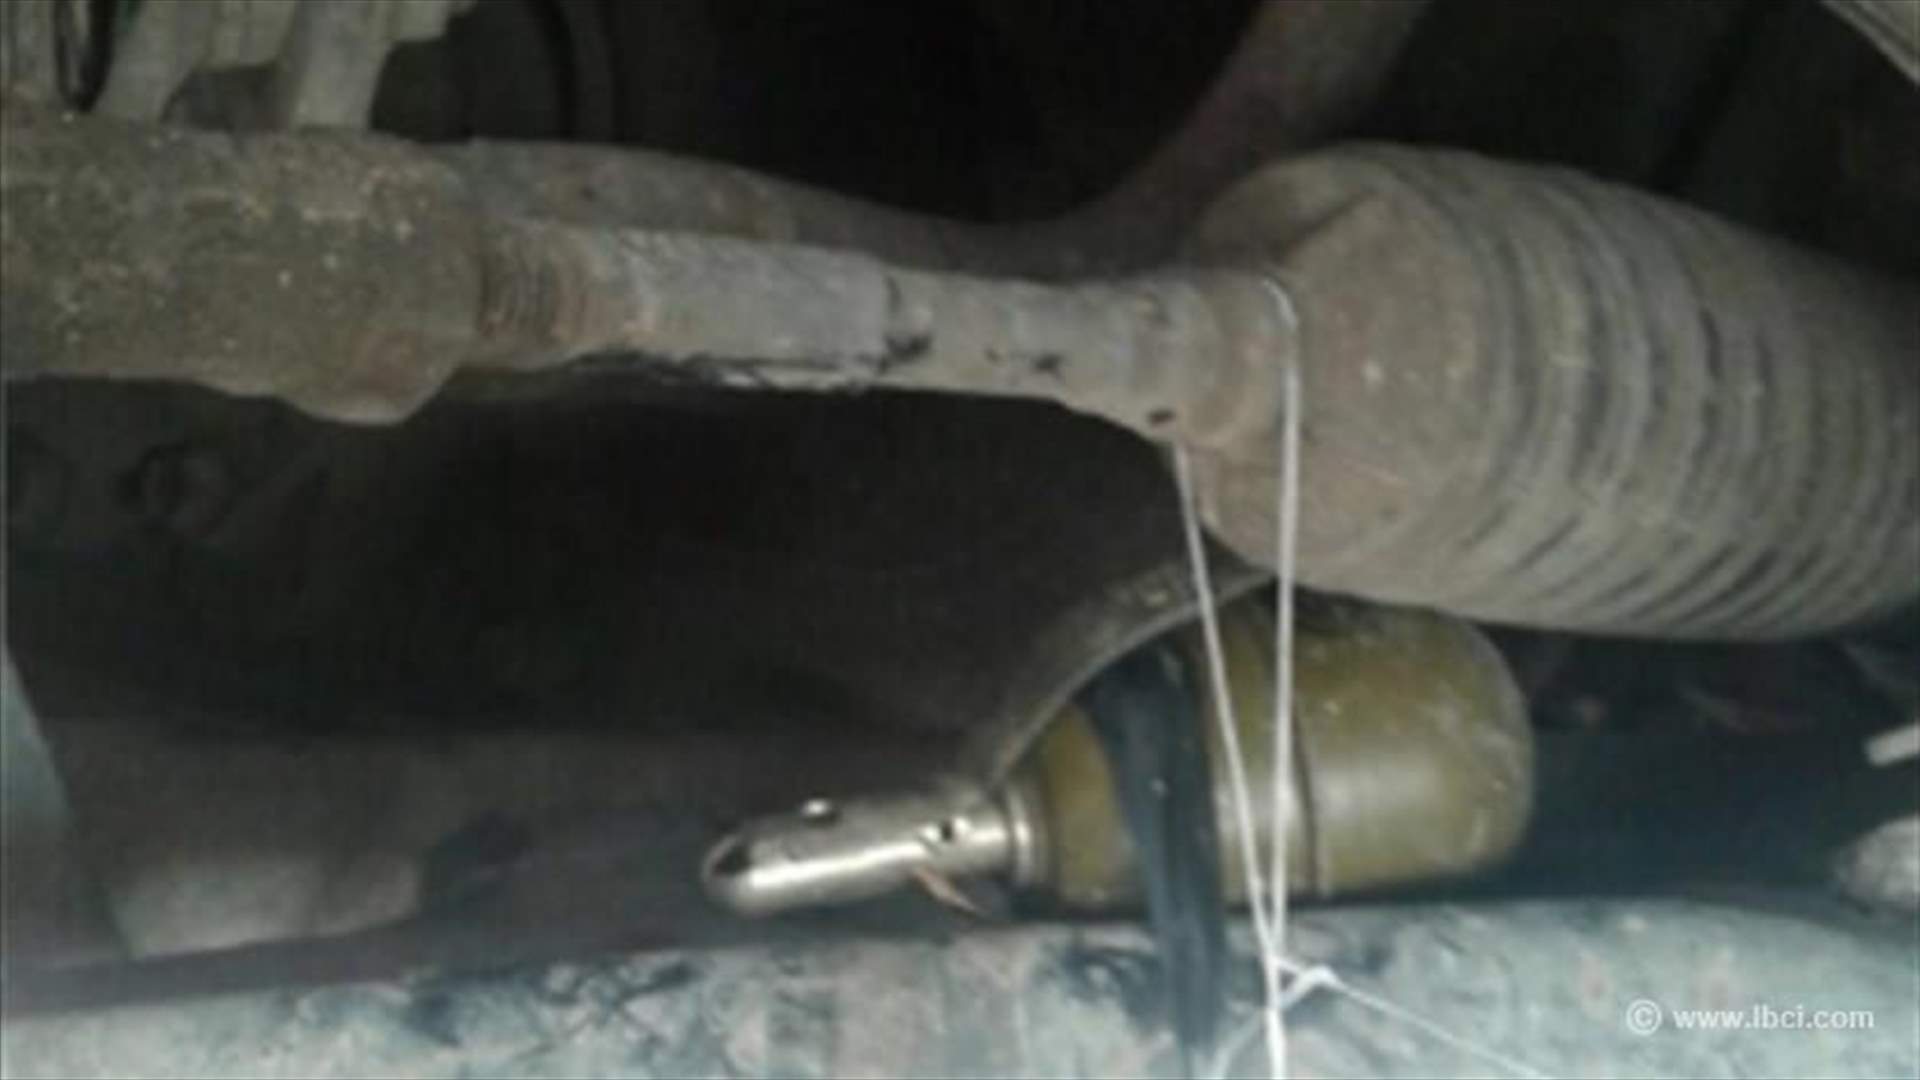 [PHOTO] Army dismantles bomb placed under car of Palestinian official’s son 